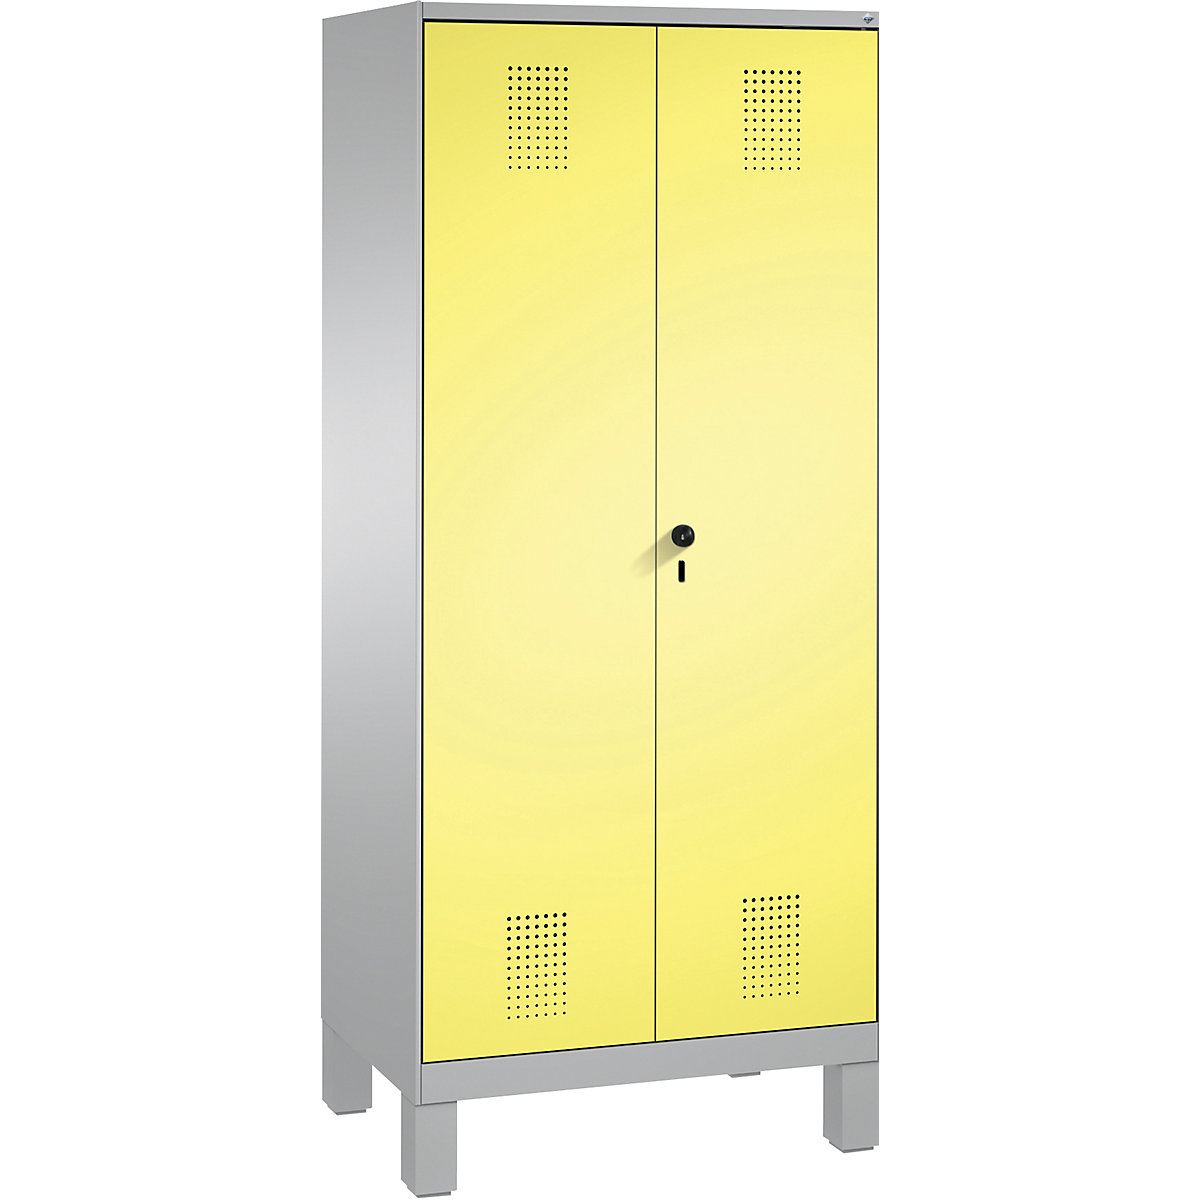 EVOLO cloakroom locker, doors close in the middle – C+P, 2 compartments, compartment width 400 mm, with feet, white aluminium / sulphur yellow-17